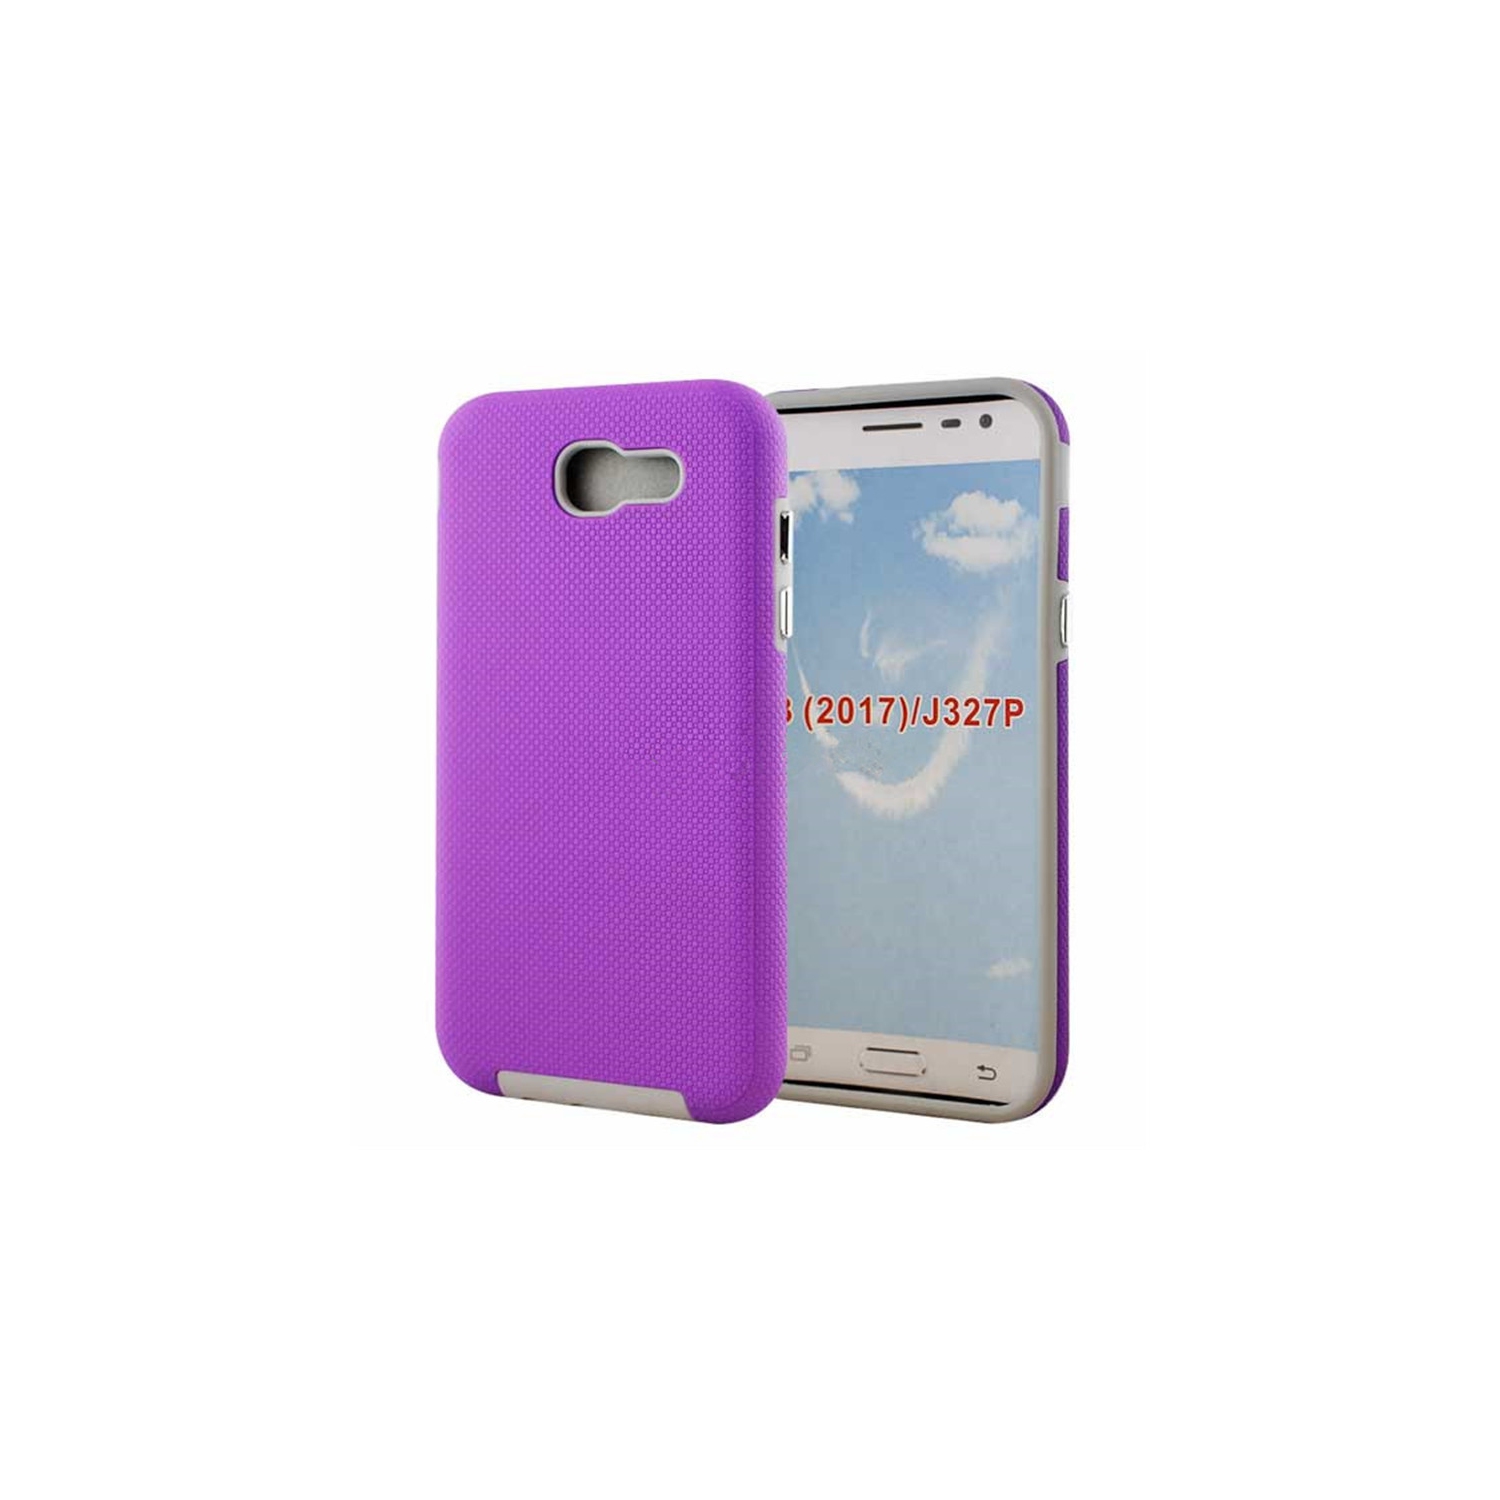 【CSmart】 Slim Fitted Hybrid Hard PC Shell Shockproof Scratch Resistant Case Cover for Samsung Galaxy J3 Prime 2017, Purple